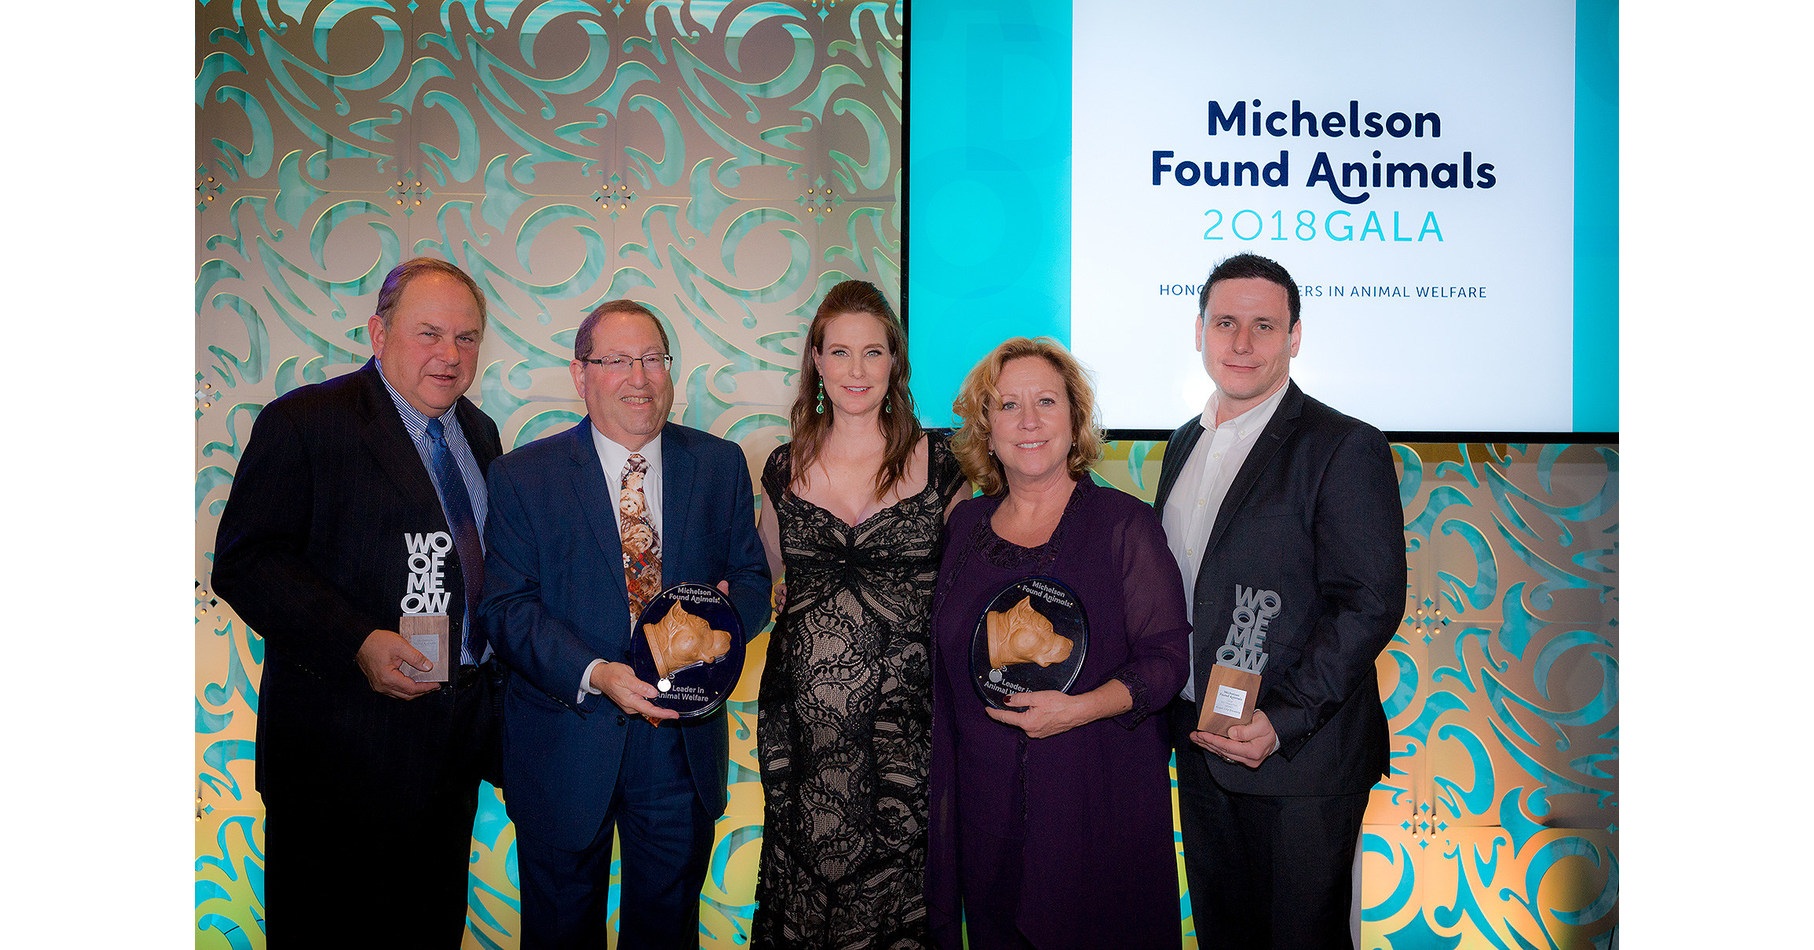 Michelson Found Animals Celebrates Animal Advocates At The 7th Annual Gala